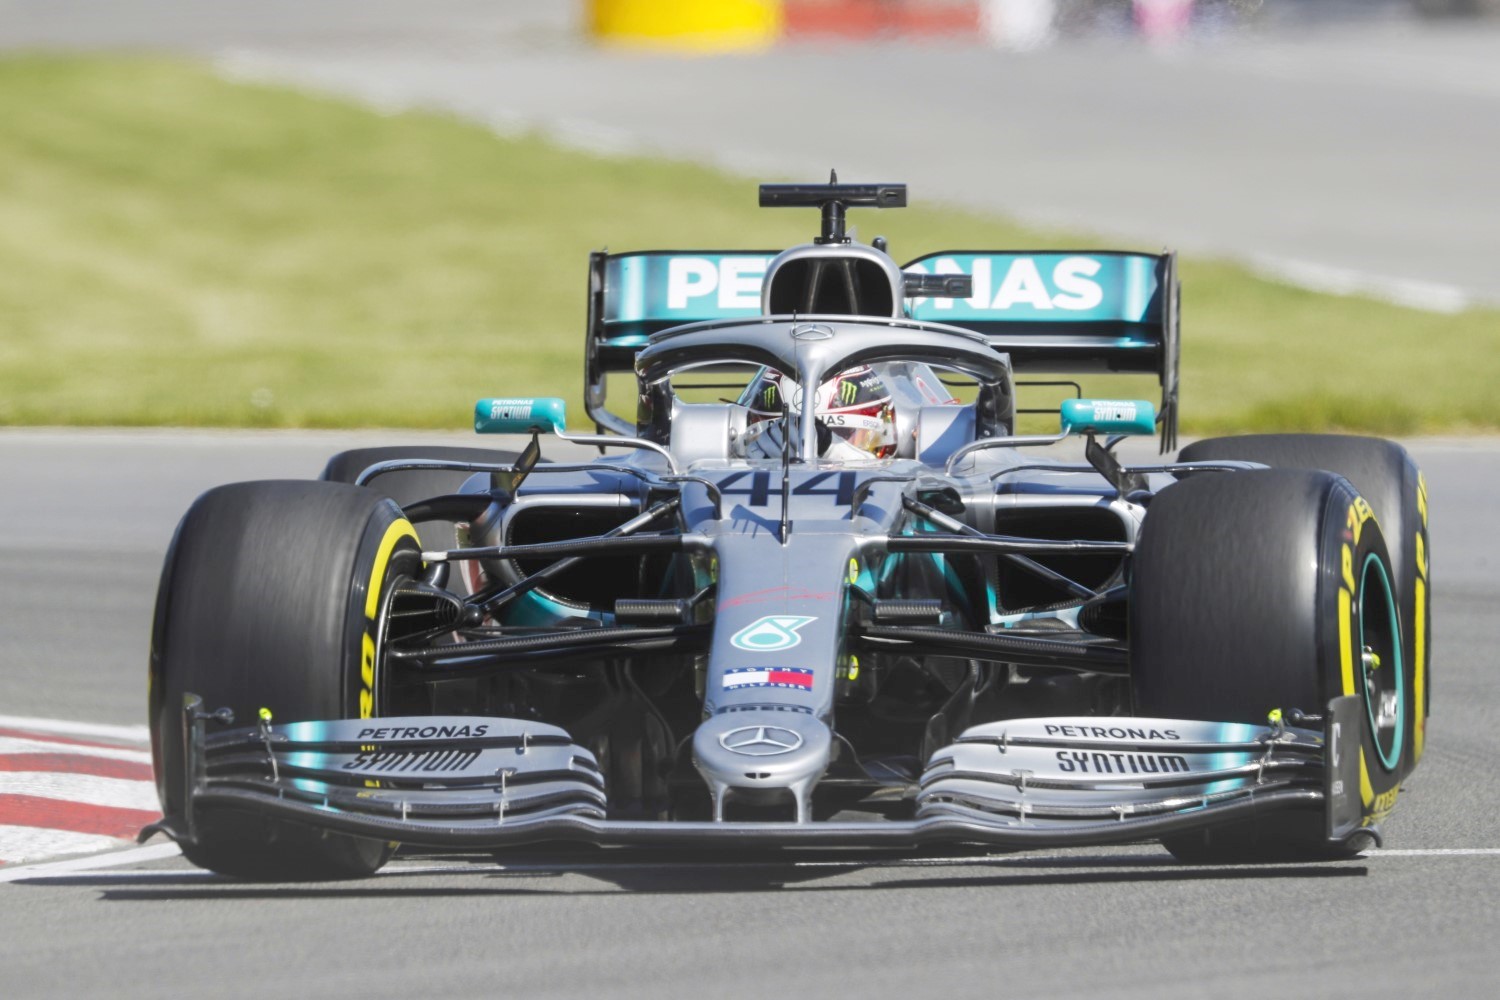 The superior Mercedes makes so much downforce the tires overheat and blister. So Pirelli made the tread thinner so they won't blister for Mercedes